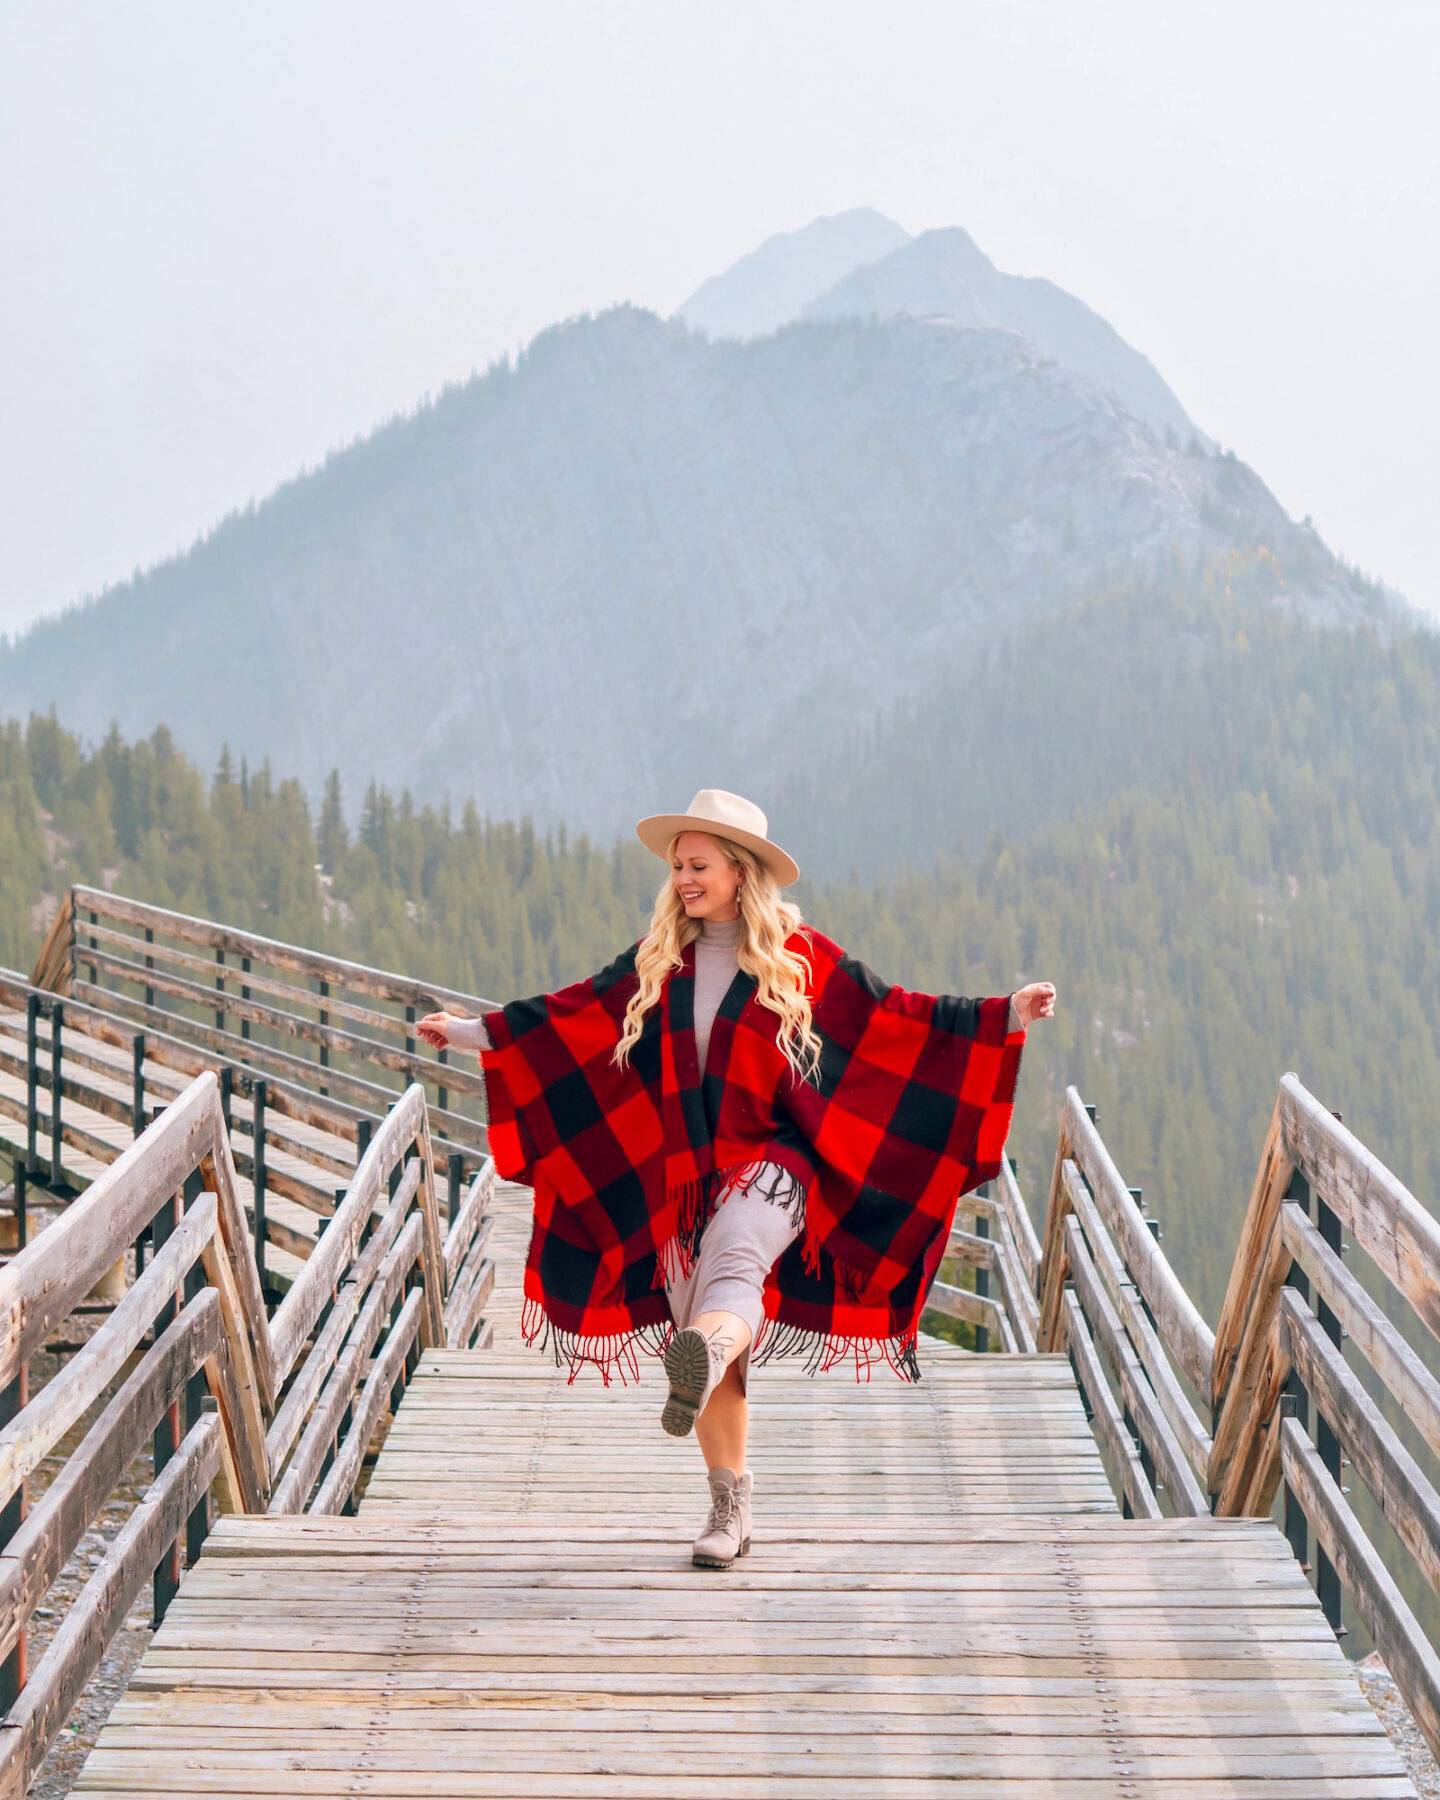 Banff is absolutely incredible. Although most people visit Banff when the weather is warmer, it's absolutely magical to visit in winter. Here's a local's guide to some of the best things to do in in Banff in winter. From hikes and trails to winter sports, family friendly excursions, dining experiences and more. You won't want to miss this guide that will surely convince you to add Banff in winter to your travel bucket list. Pictured here: Take in the view from the Banff Gondola